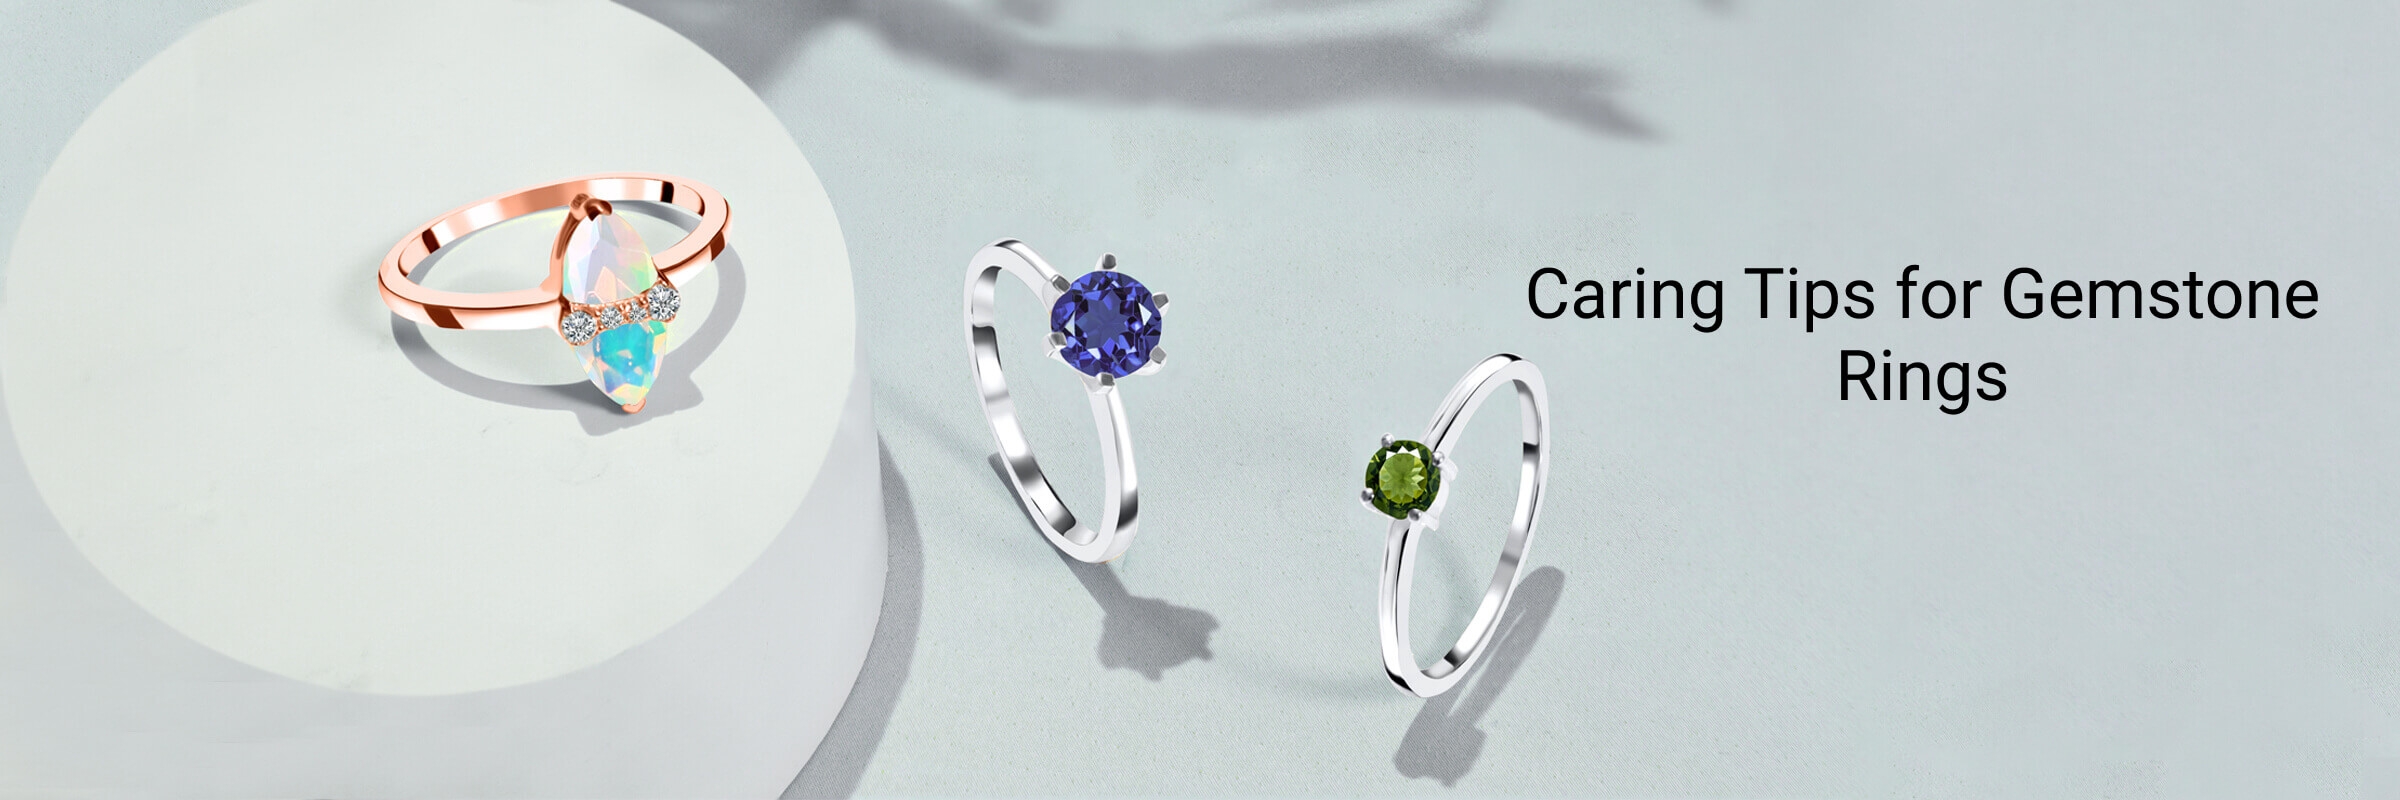 How to Care Gemstone Rings